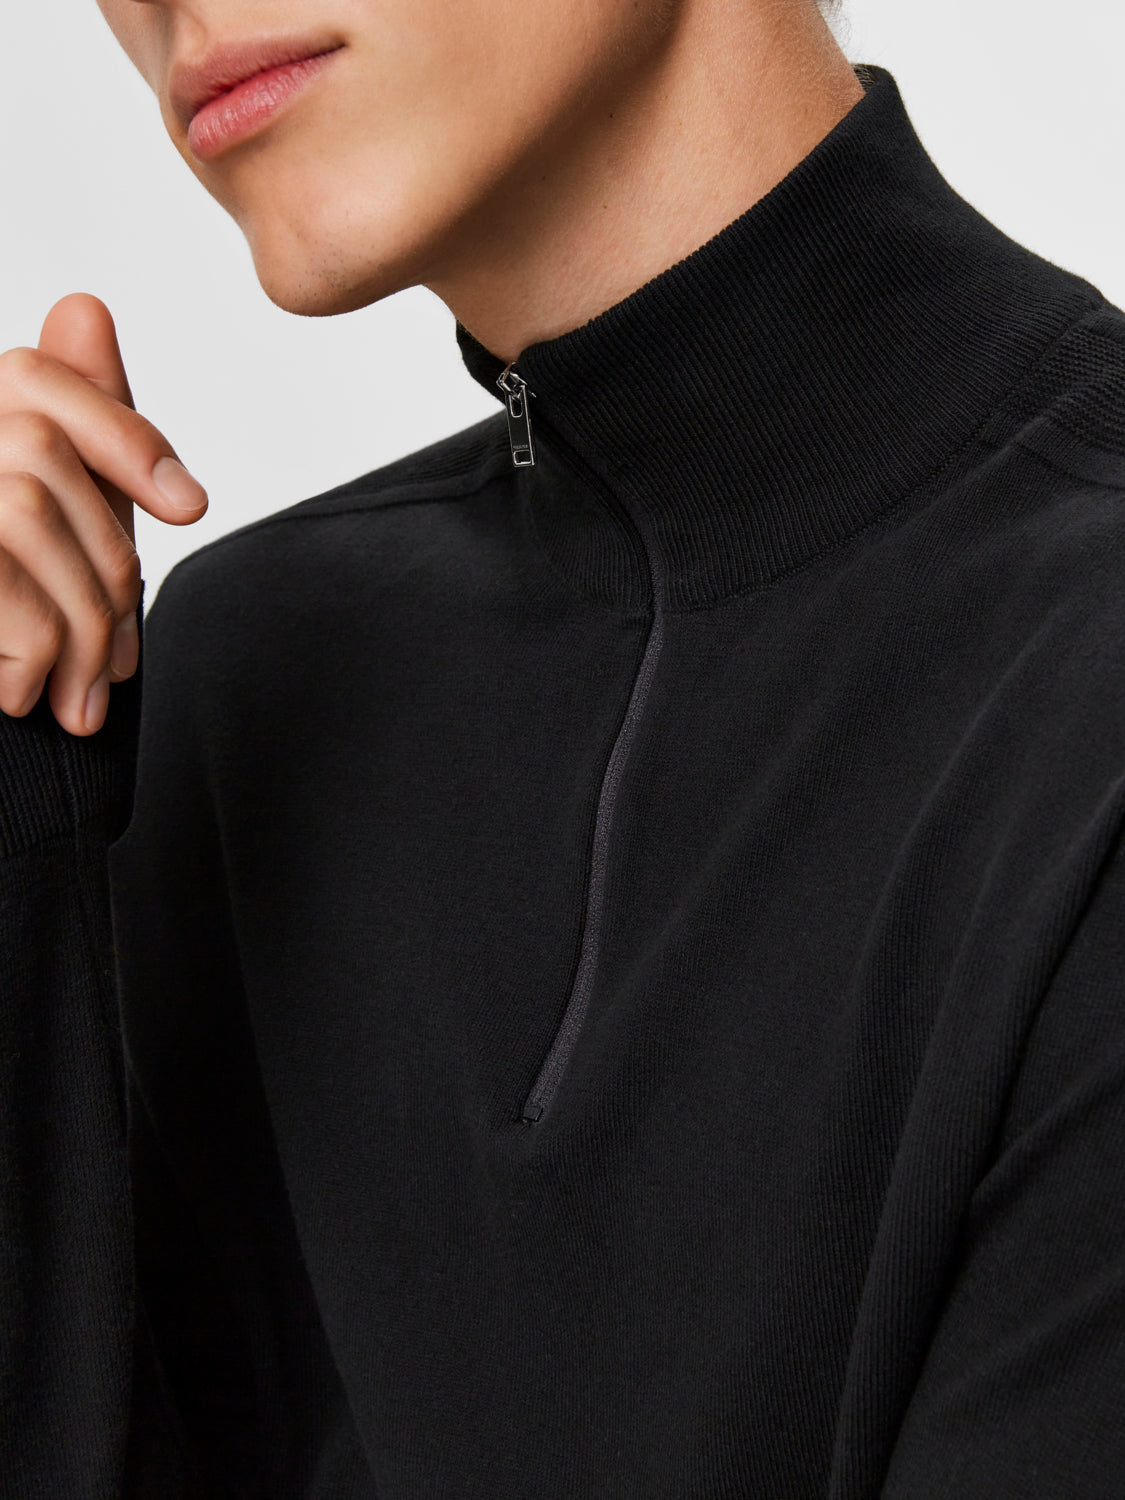 SELECTED HOMME - BERG Pullover - Black